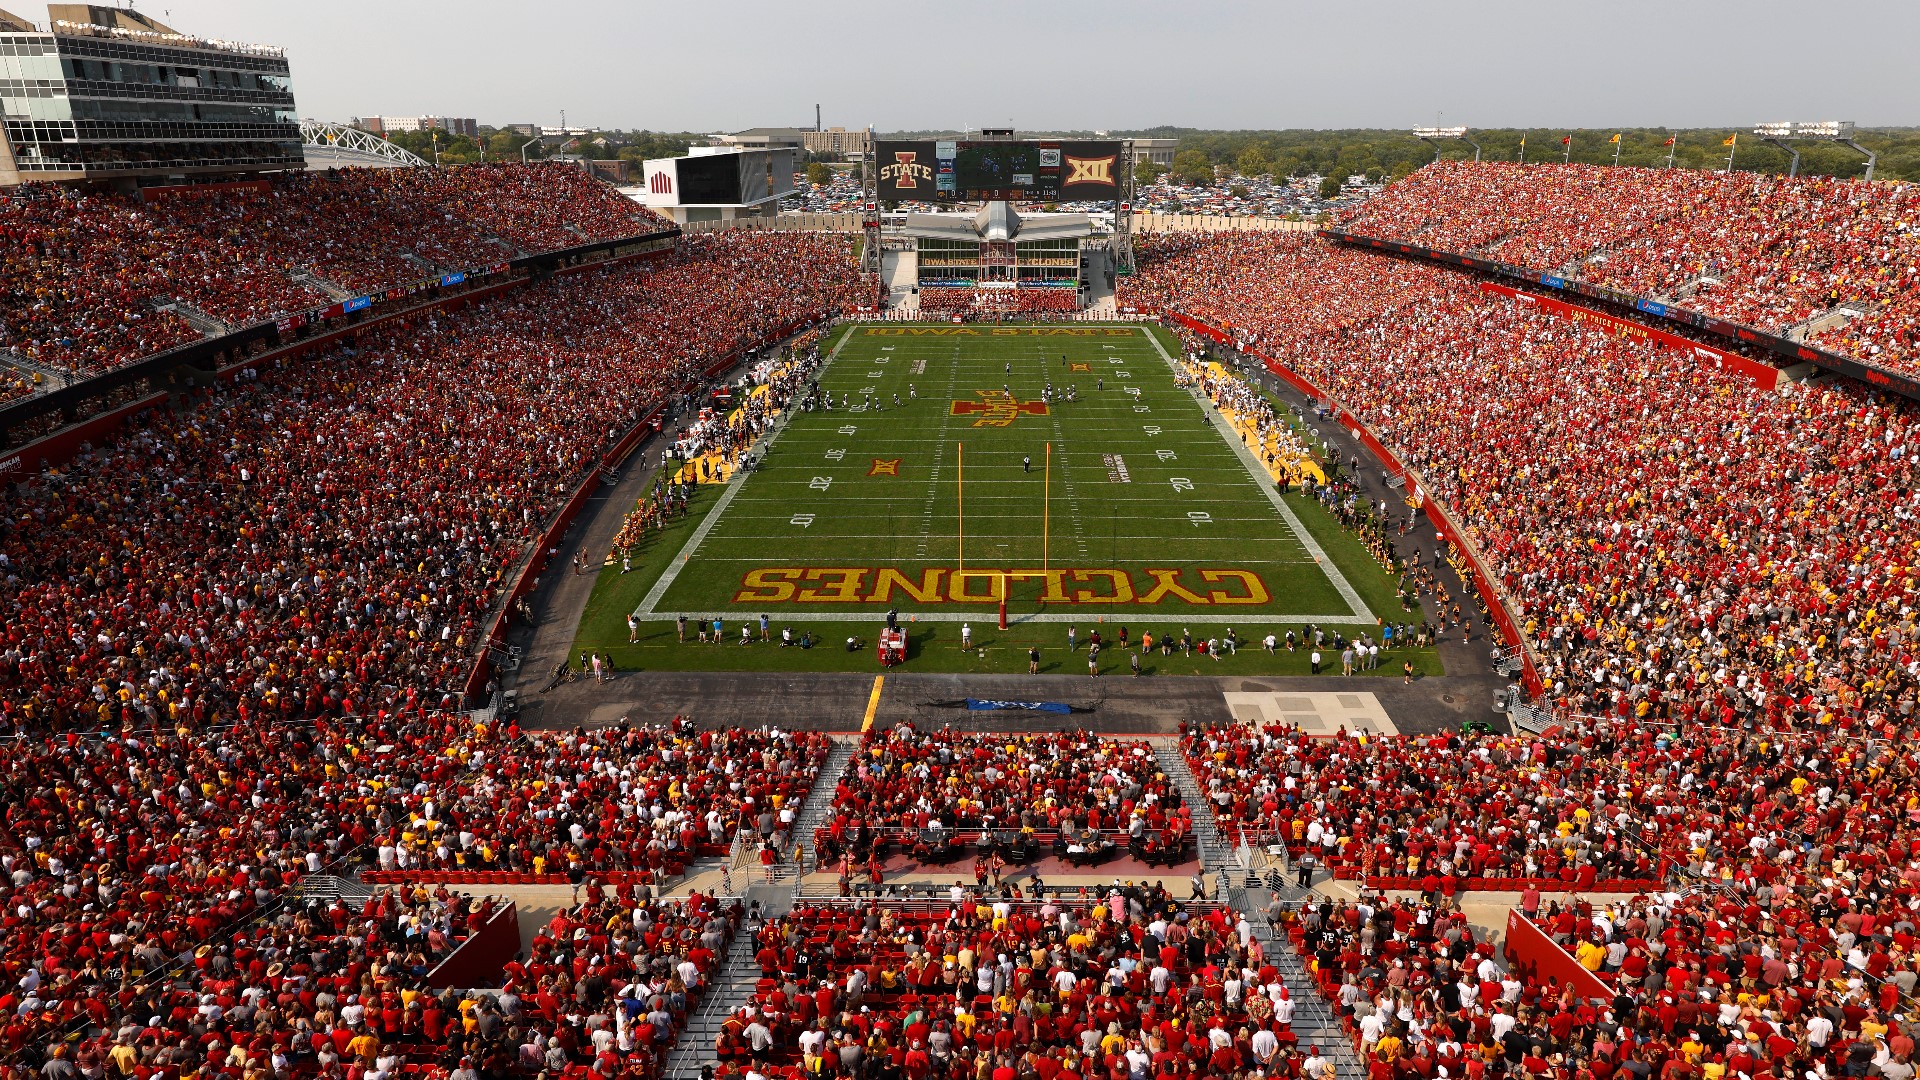 ISU's first game of the season at Jack Trice Stadium brought home a Cyclone win on Saturday, but attendees had some trouble getting through the doors.